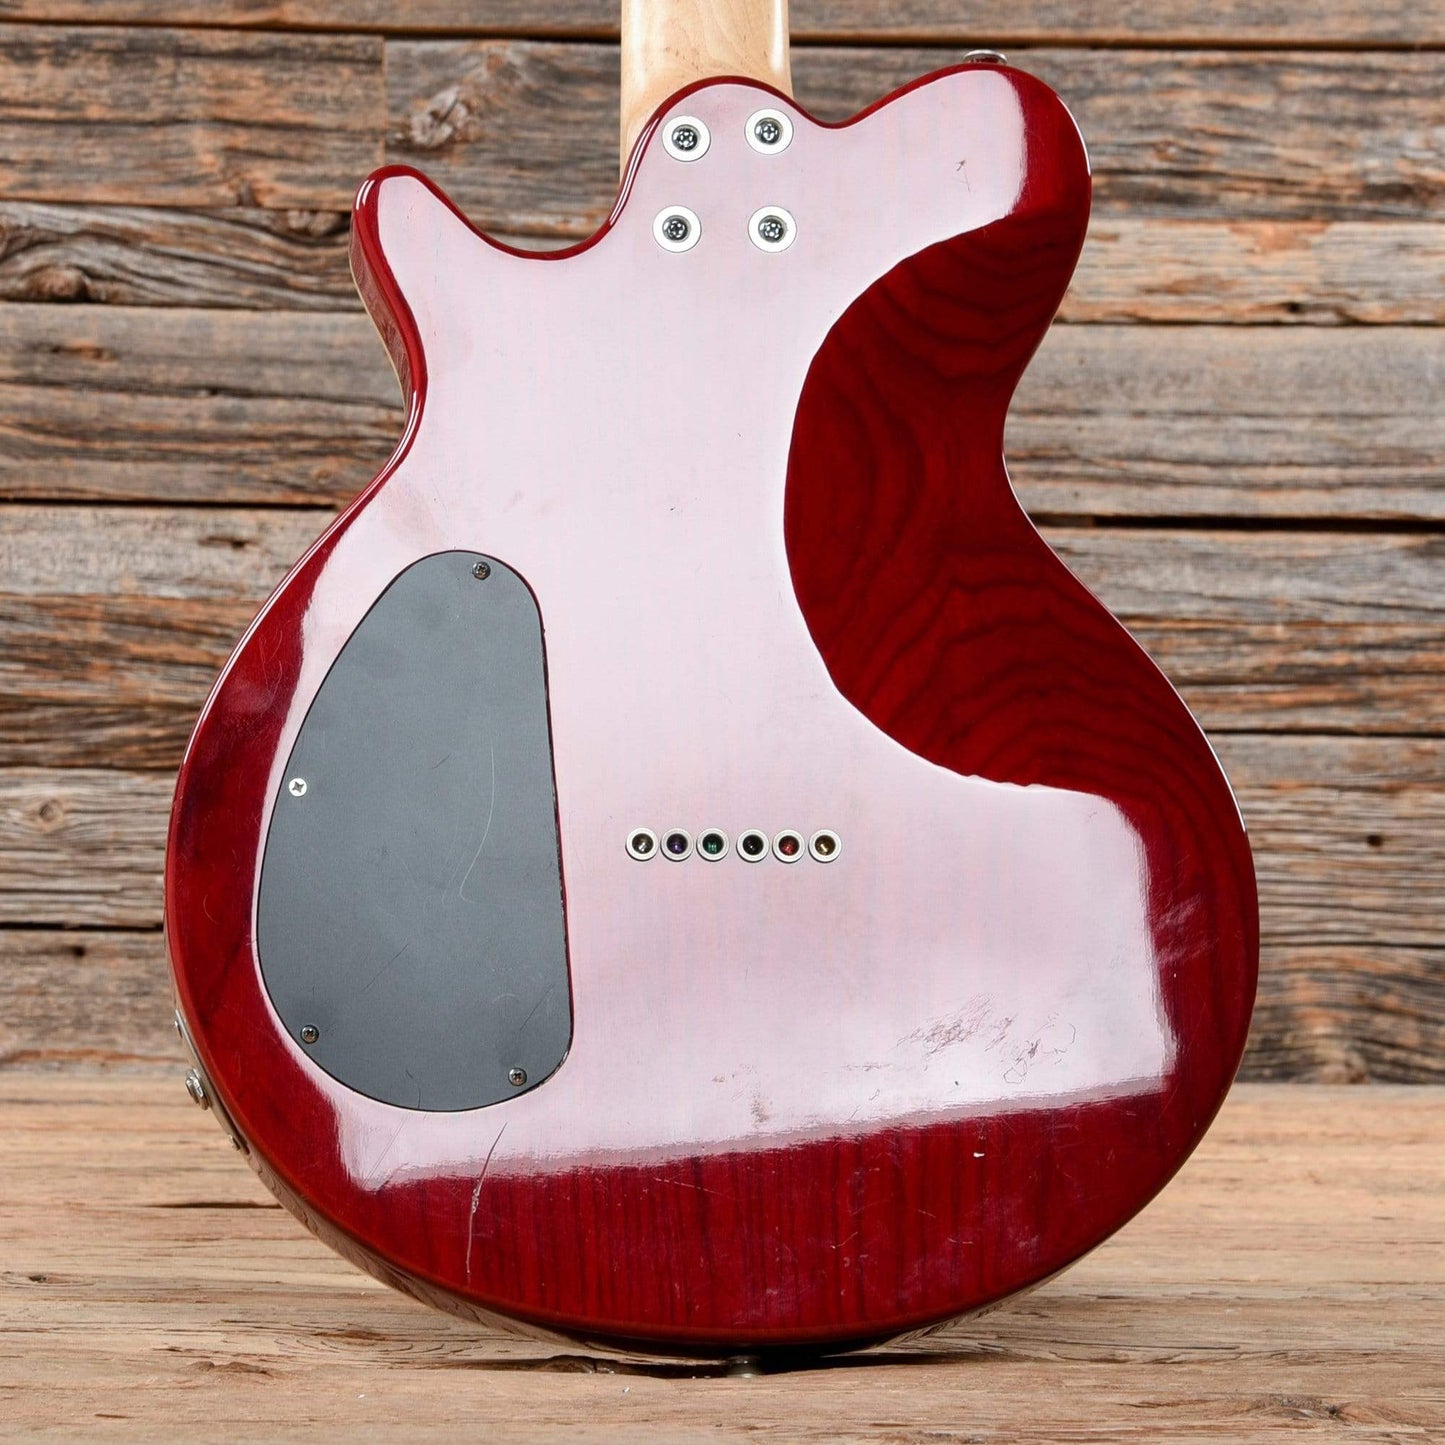 Hohner OSC Red Electric Guitars / Solid Body